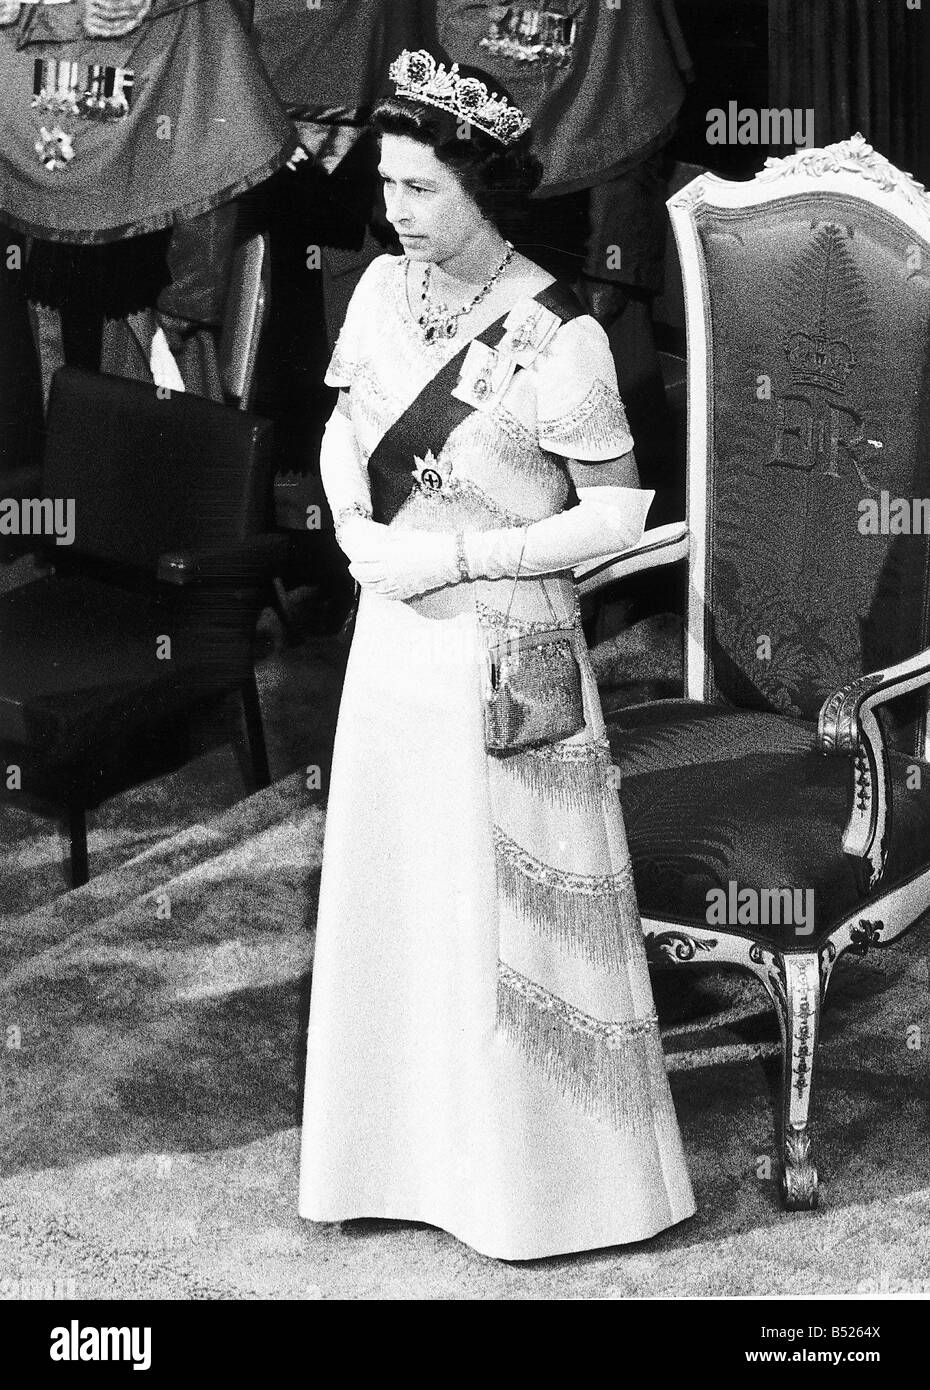 Hrh Queen Elizabeth Ii At The Royal Silver Jubilee Tour In New Zealand 7438